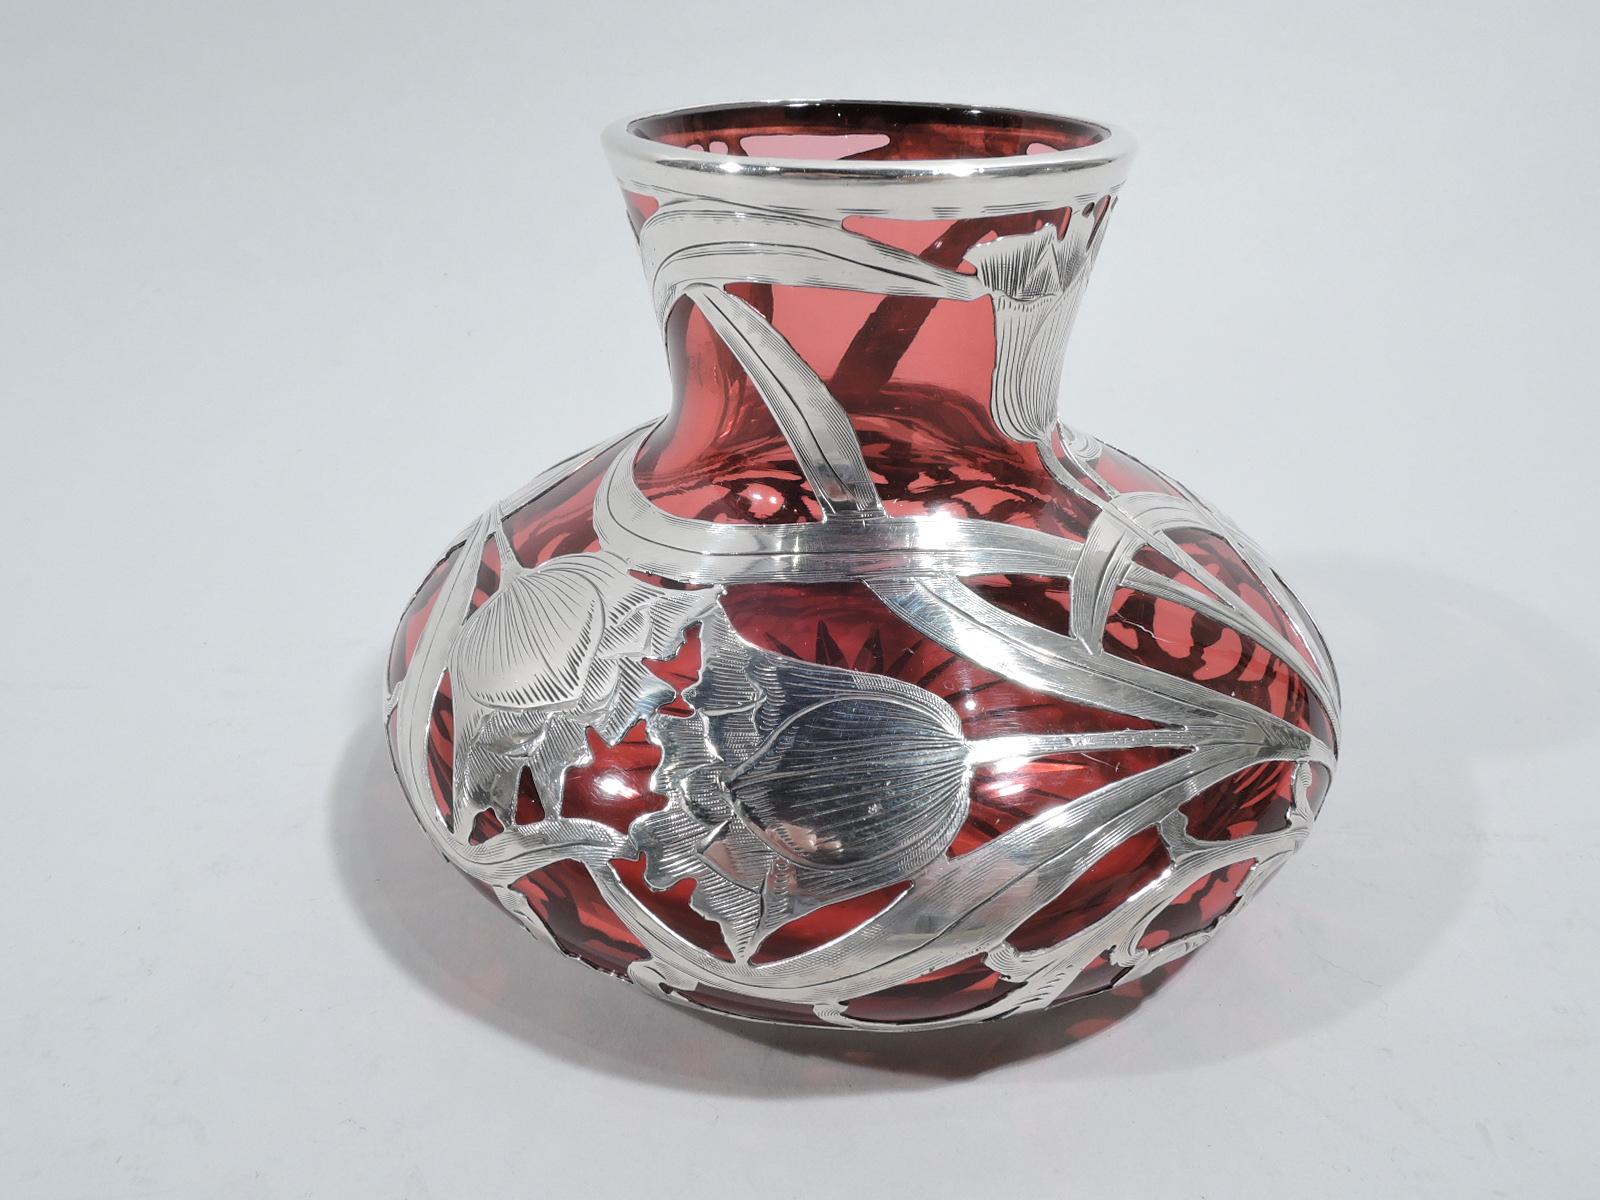 Turn-of-the-century Art Nouveau glass vase with engraved silver overlay. Made by Alvin in Providence. Bellied bowl and short and flared neck. Loose and dynamic pattern comprising flower heads with entwined stems and tendrils. Star cut to underside.